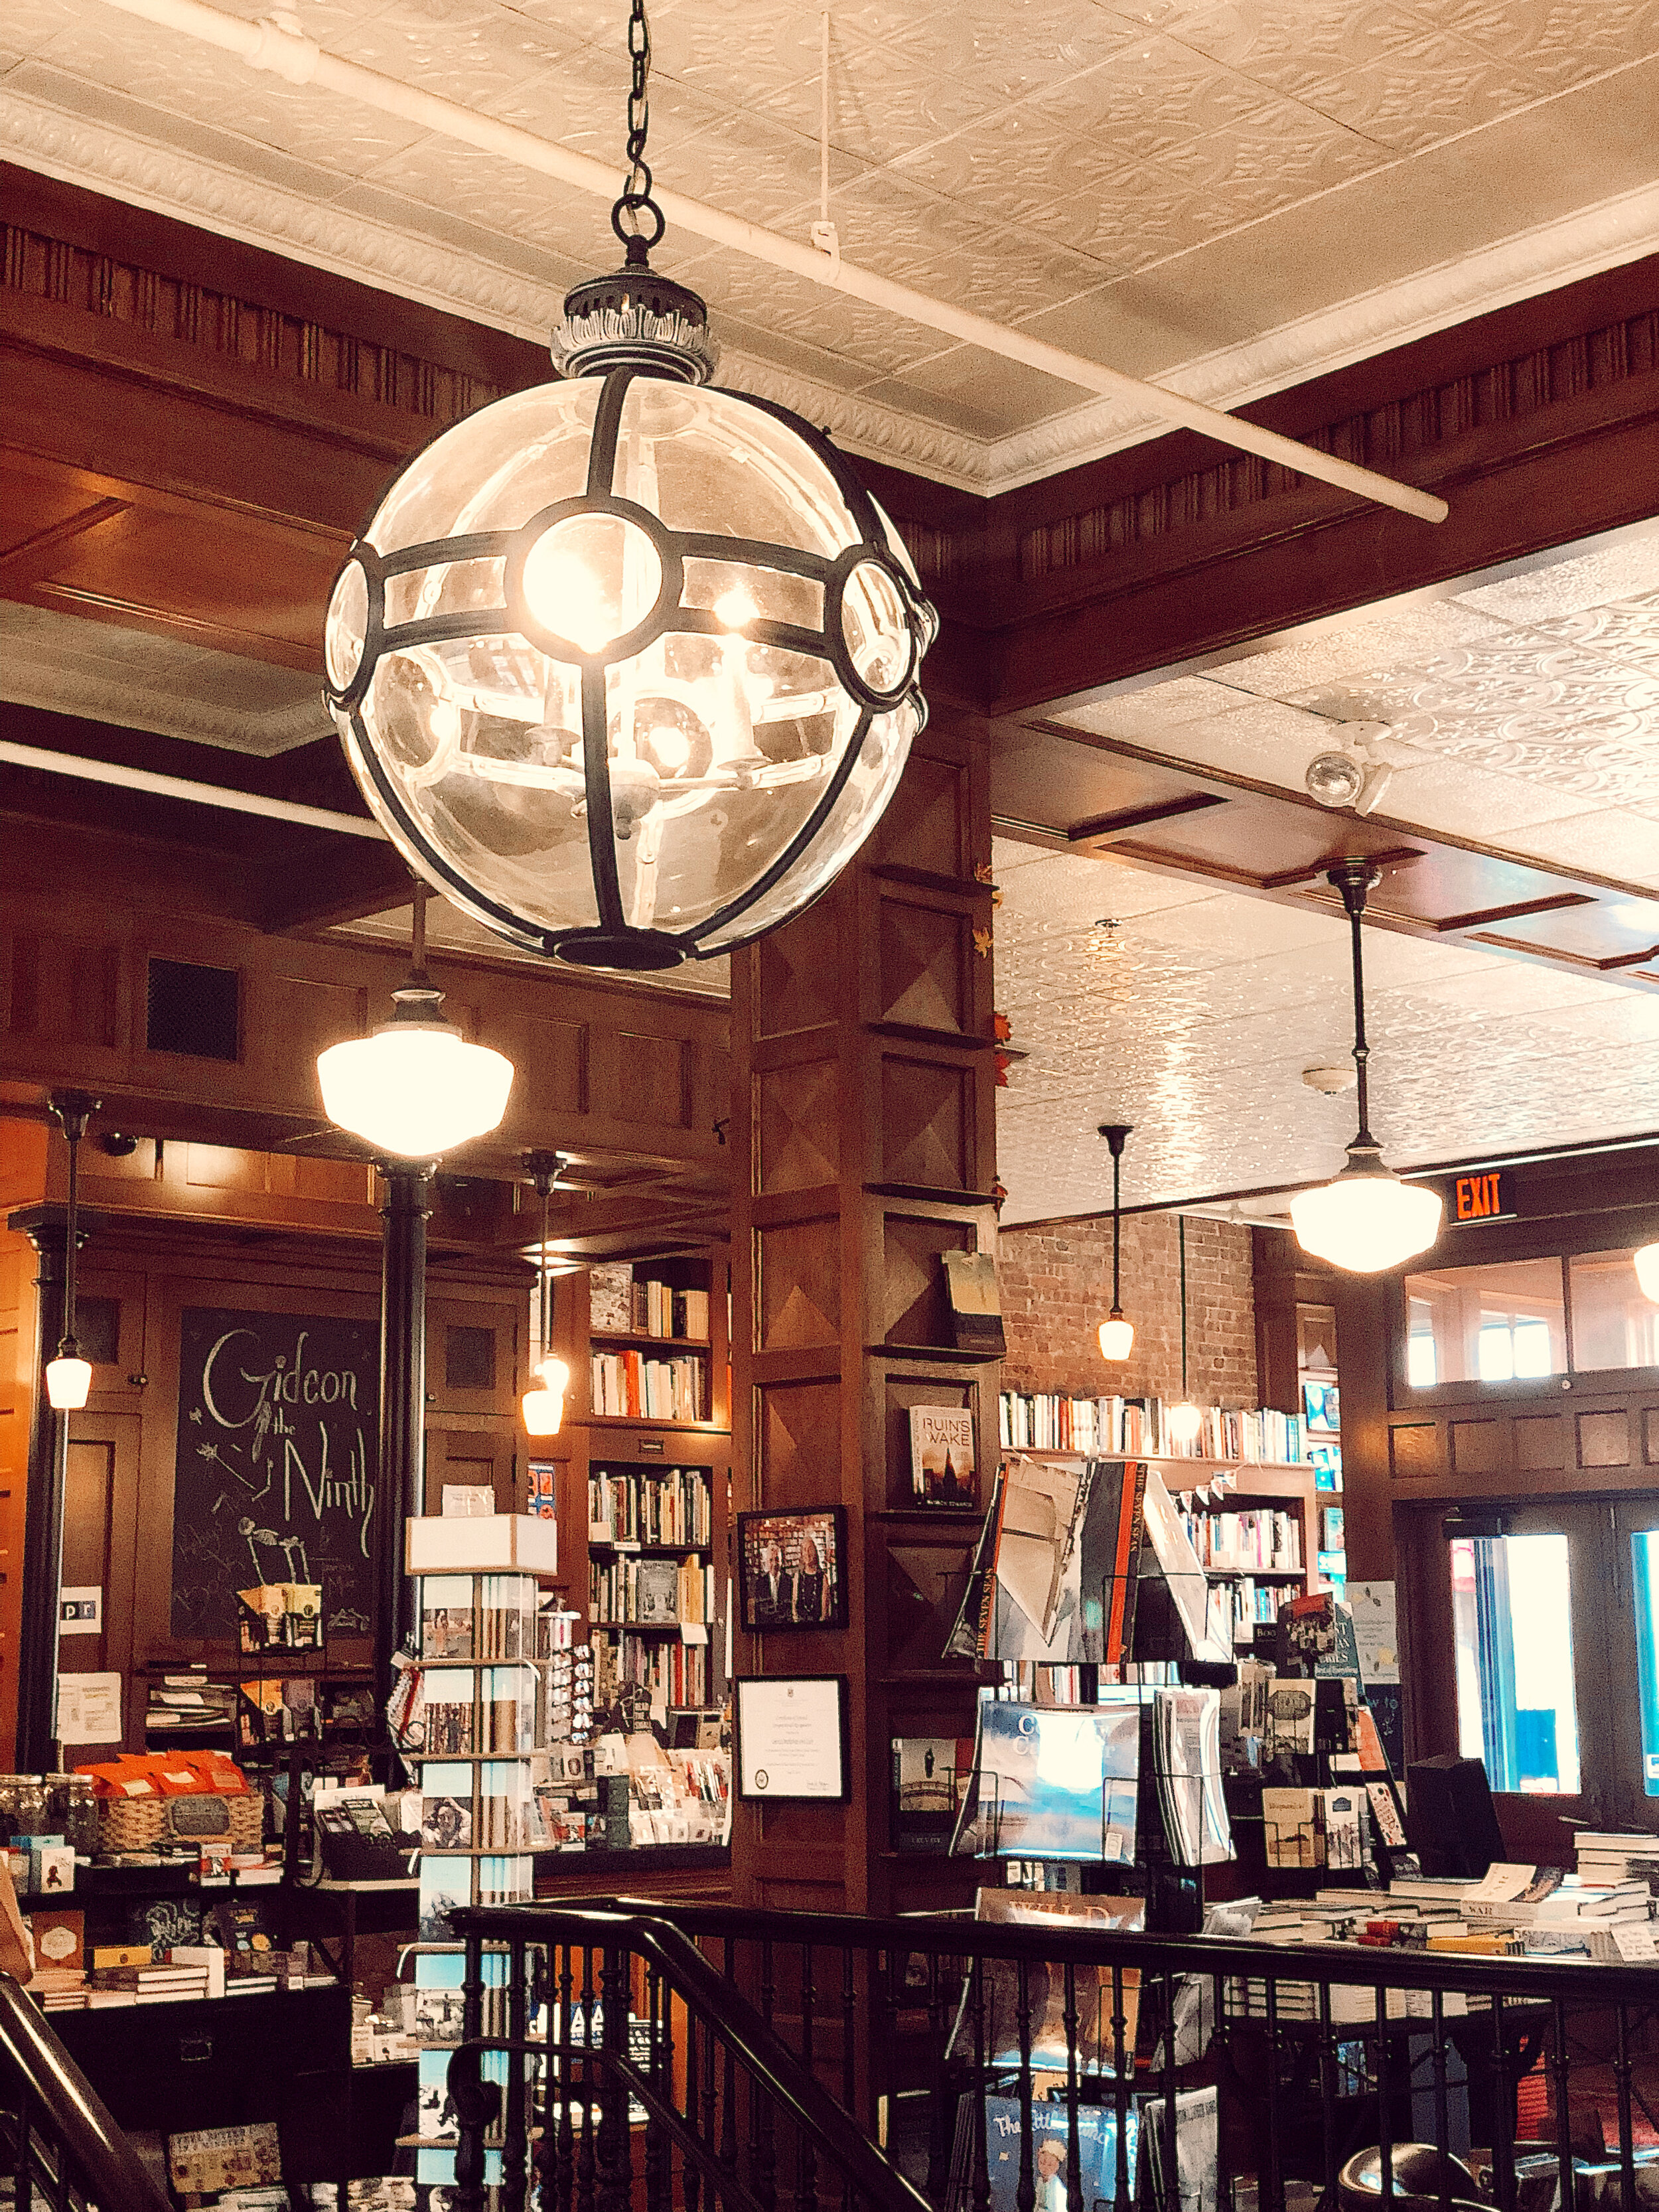  The interior of Savoy is stunning—with antique fixtures and flooring, elaborate trim, and even a few fairy houses to discover. 